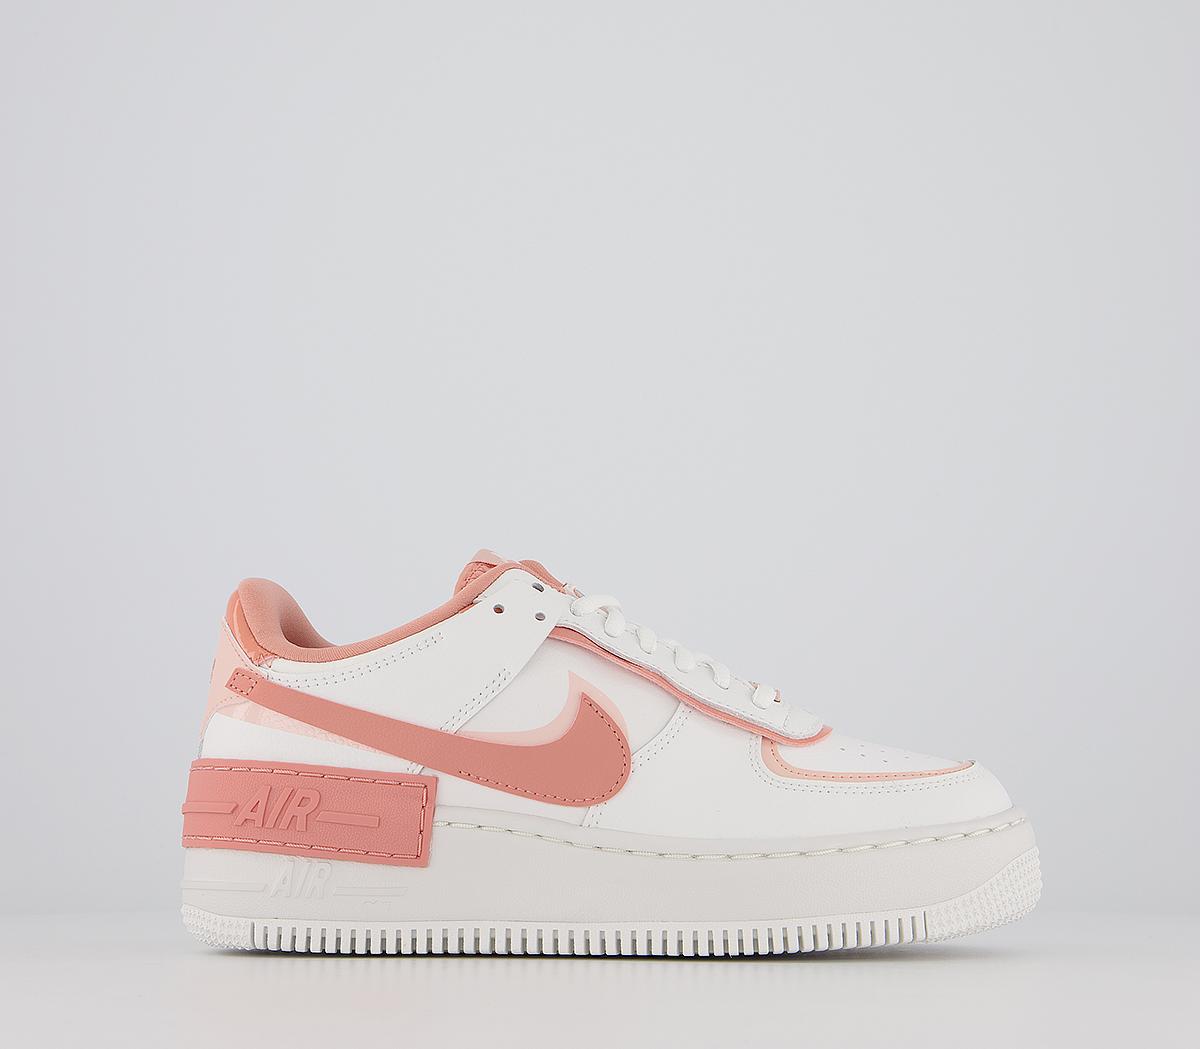 nike air force 1 shadow white and pink sneakers